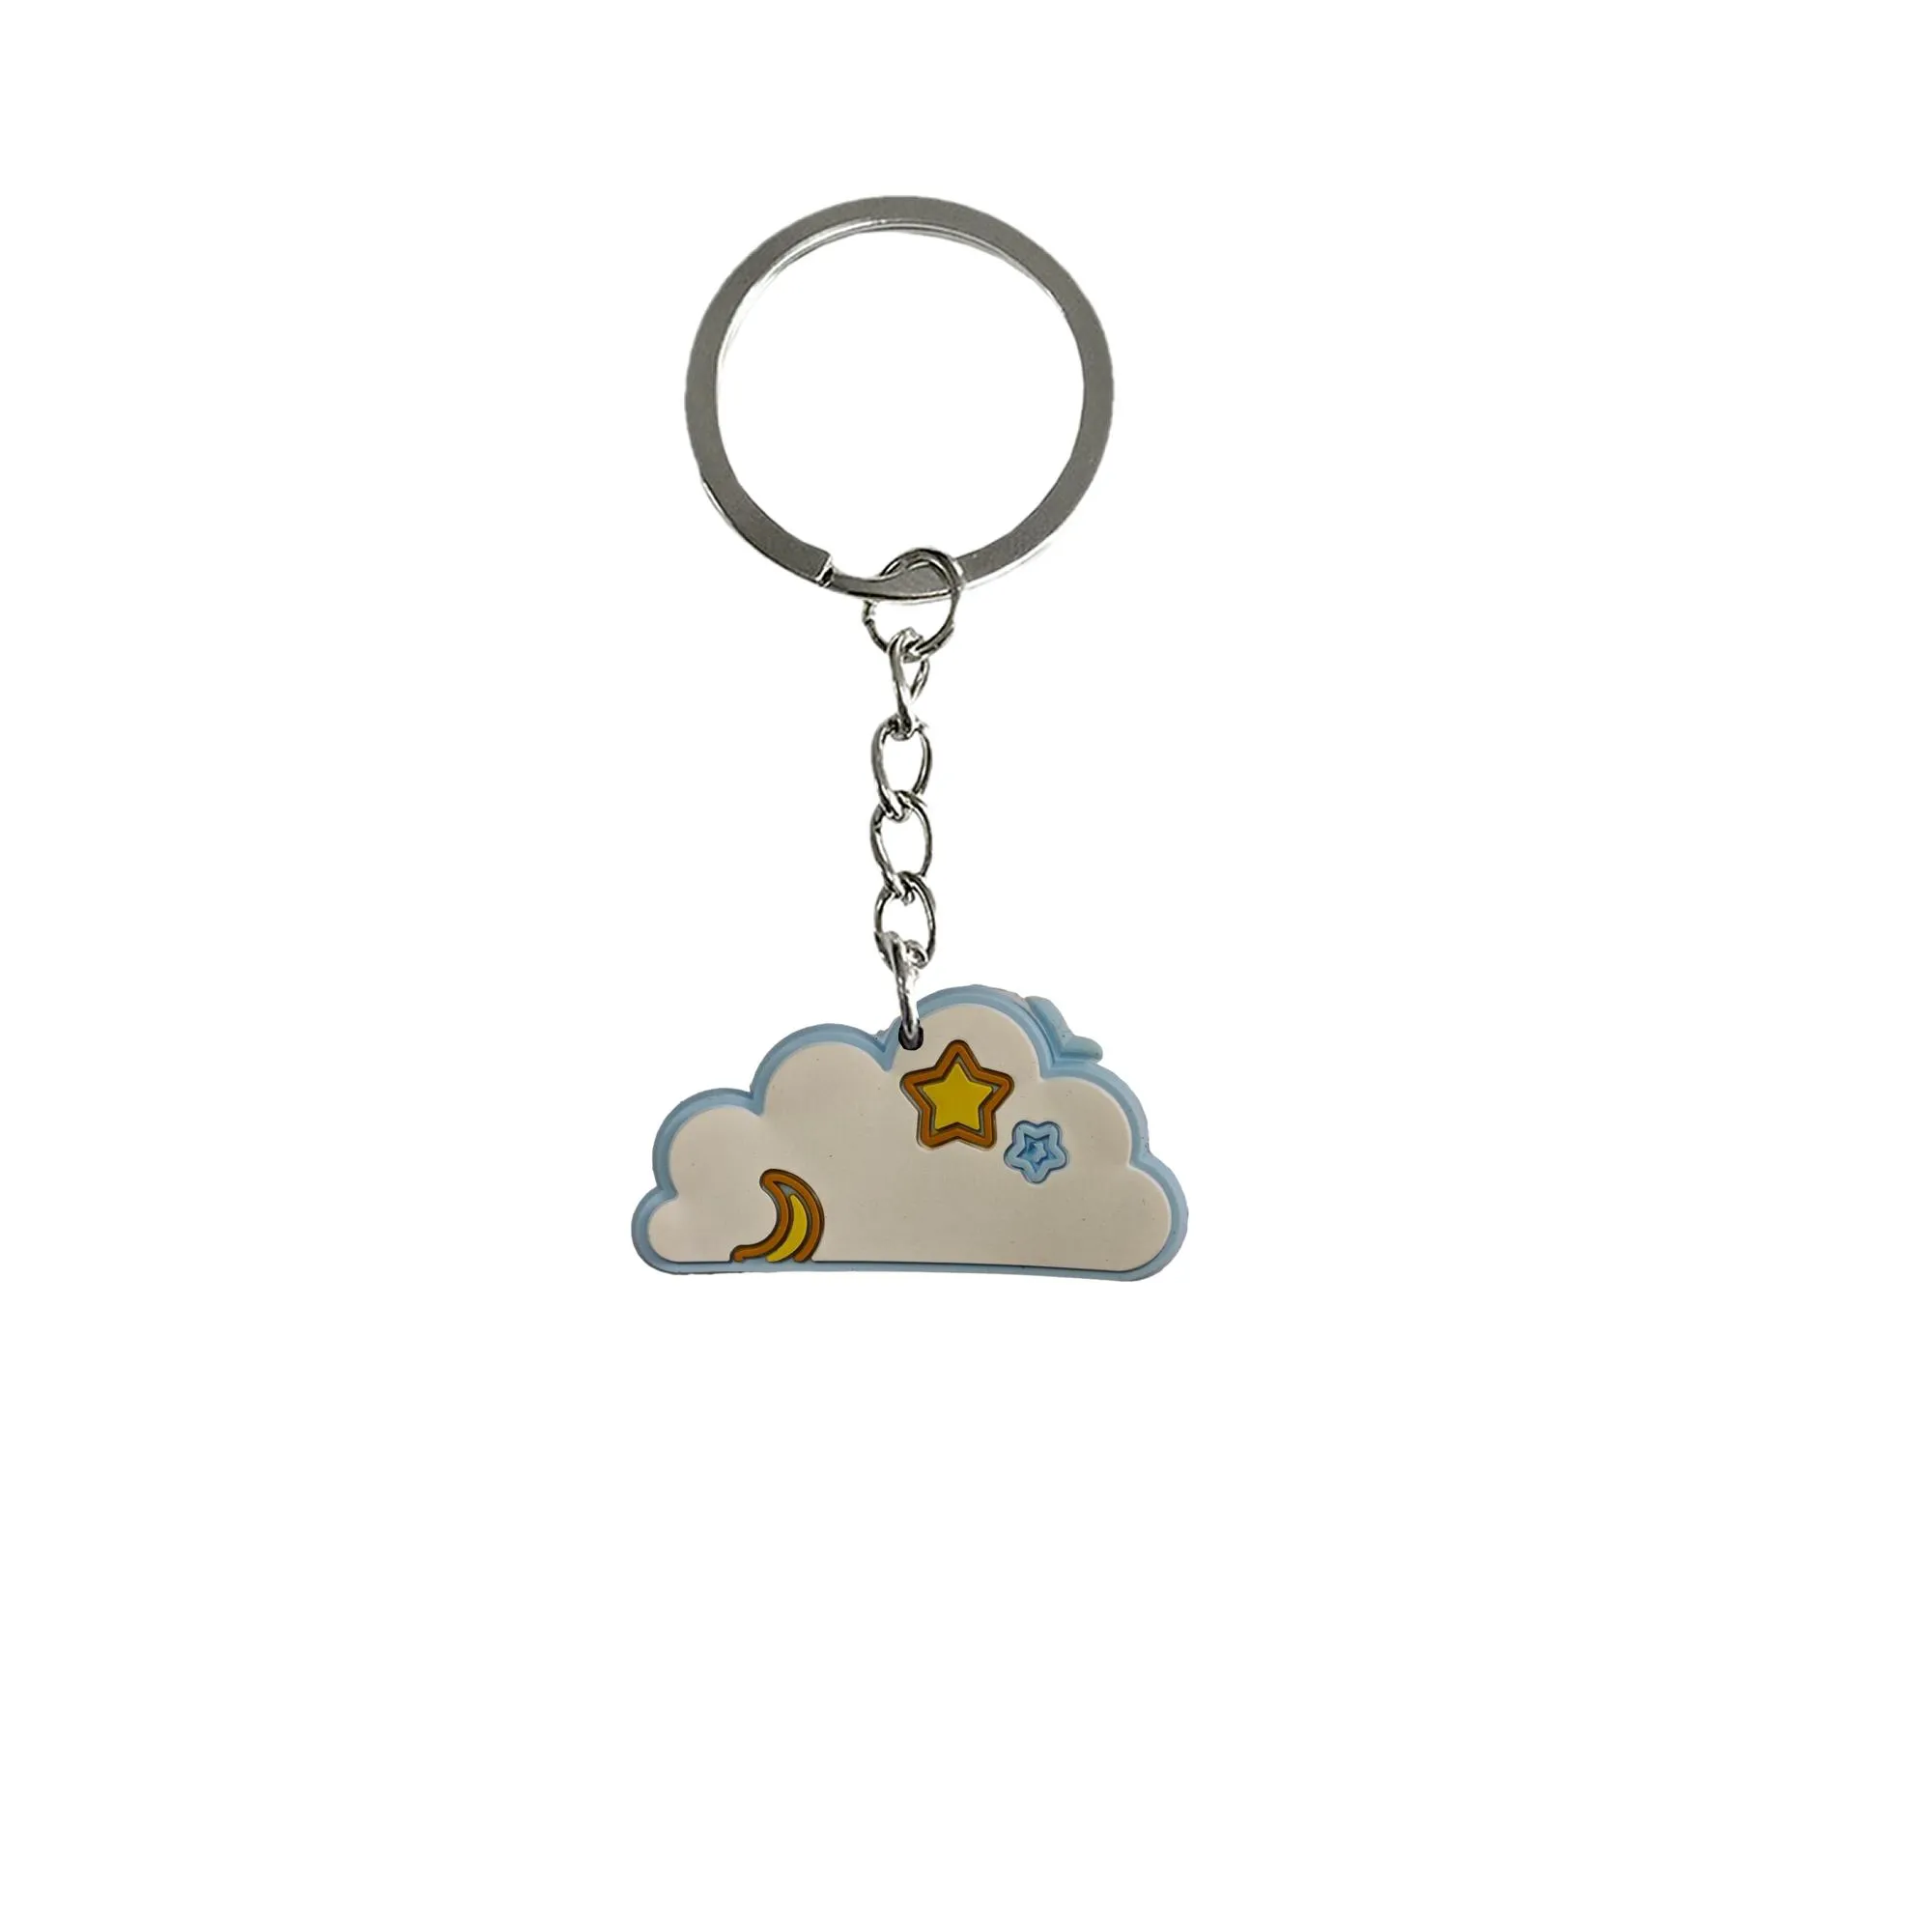 cloud keychain car bag keyring keychains party favors for boys suitable schoolbag backpack key chain kid boy girl gift ring christmas fans